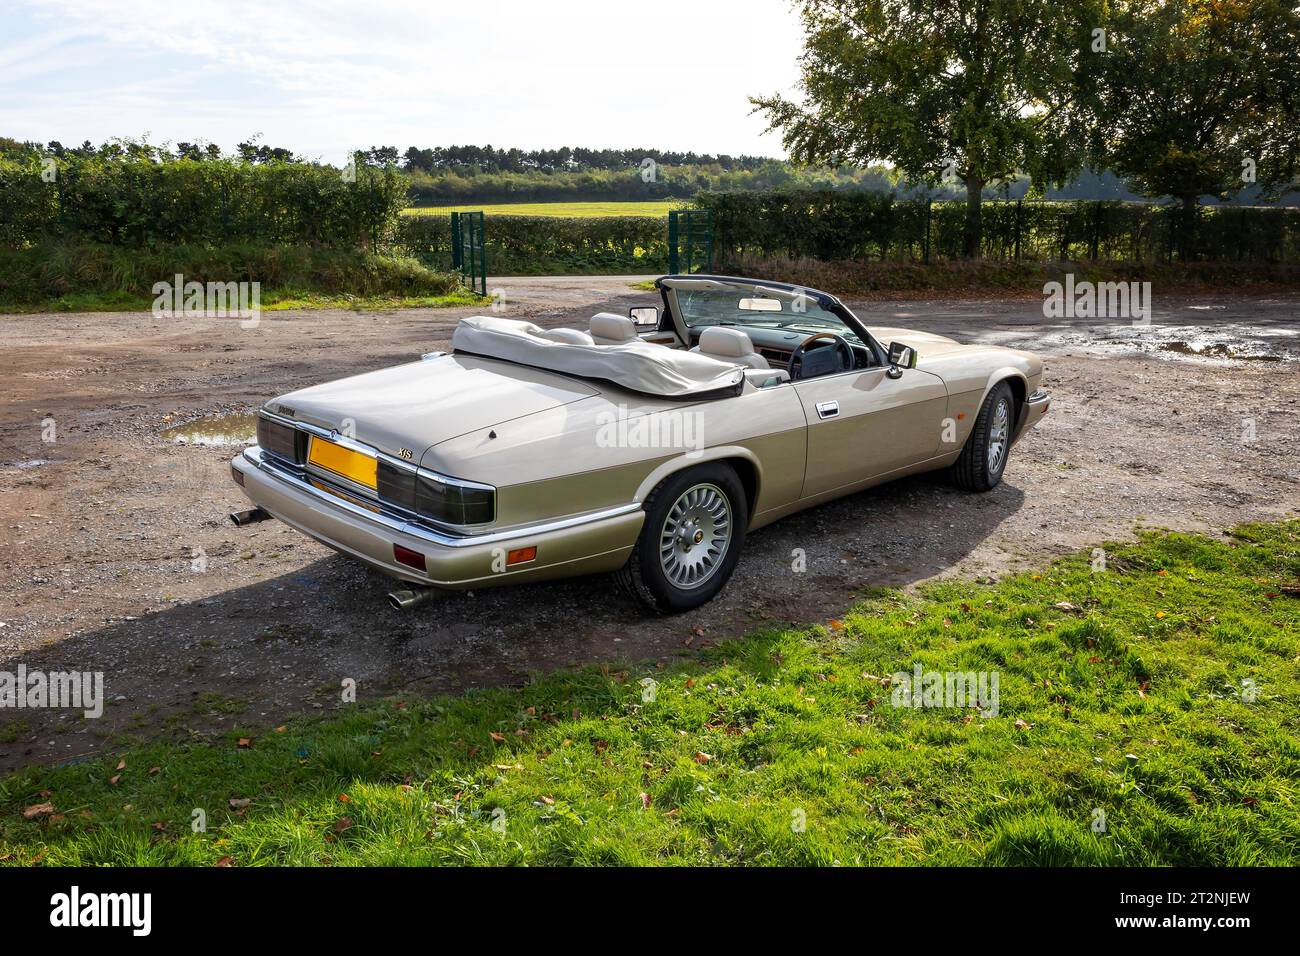 Rear view of convertible Jaguar XJS with top down on a gravel car park in the country Stock Photo